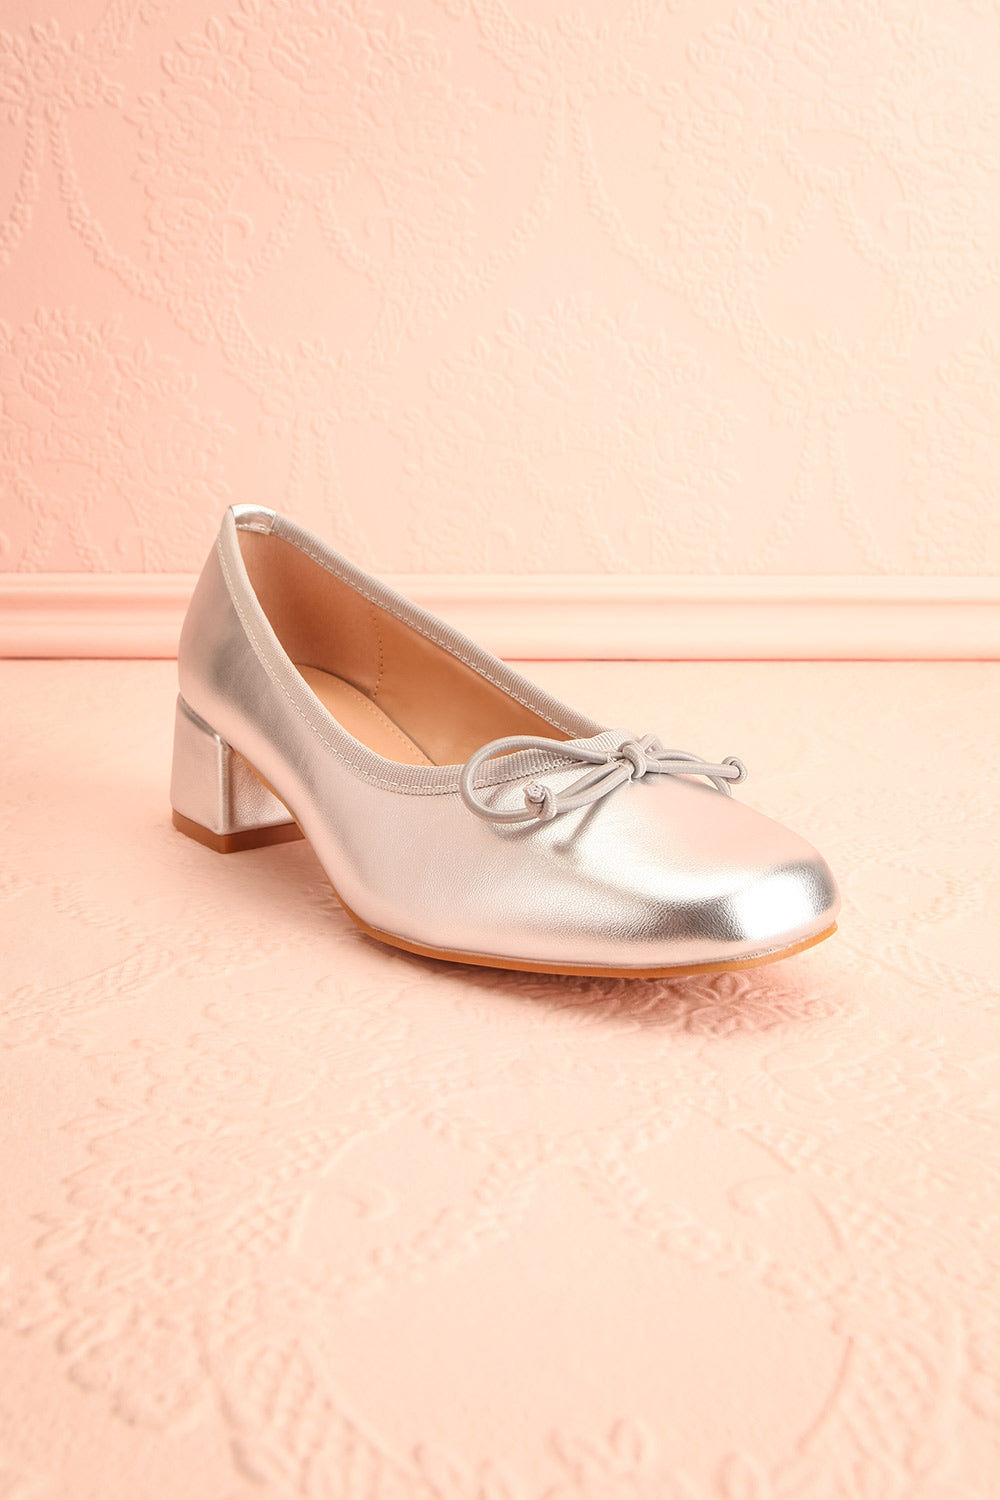 Elyria Silver Heeled Ballerina Shoes w/ Bow | Boutique 1861 front view